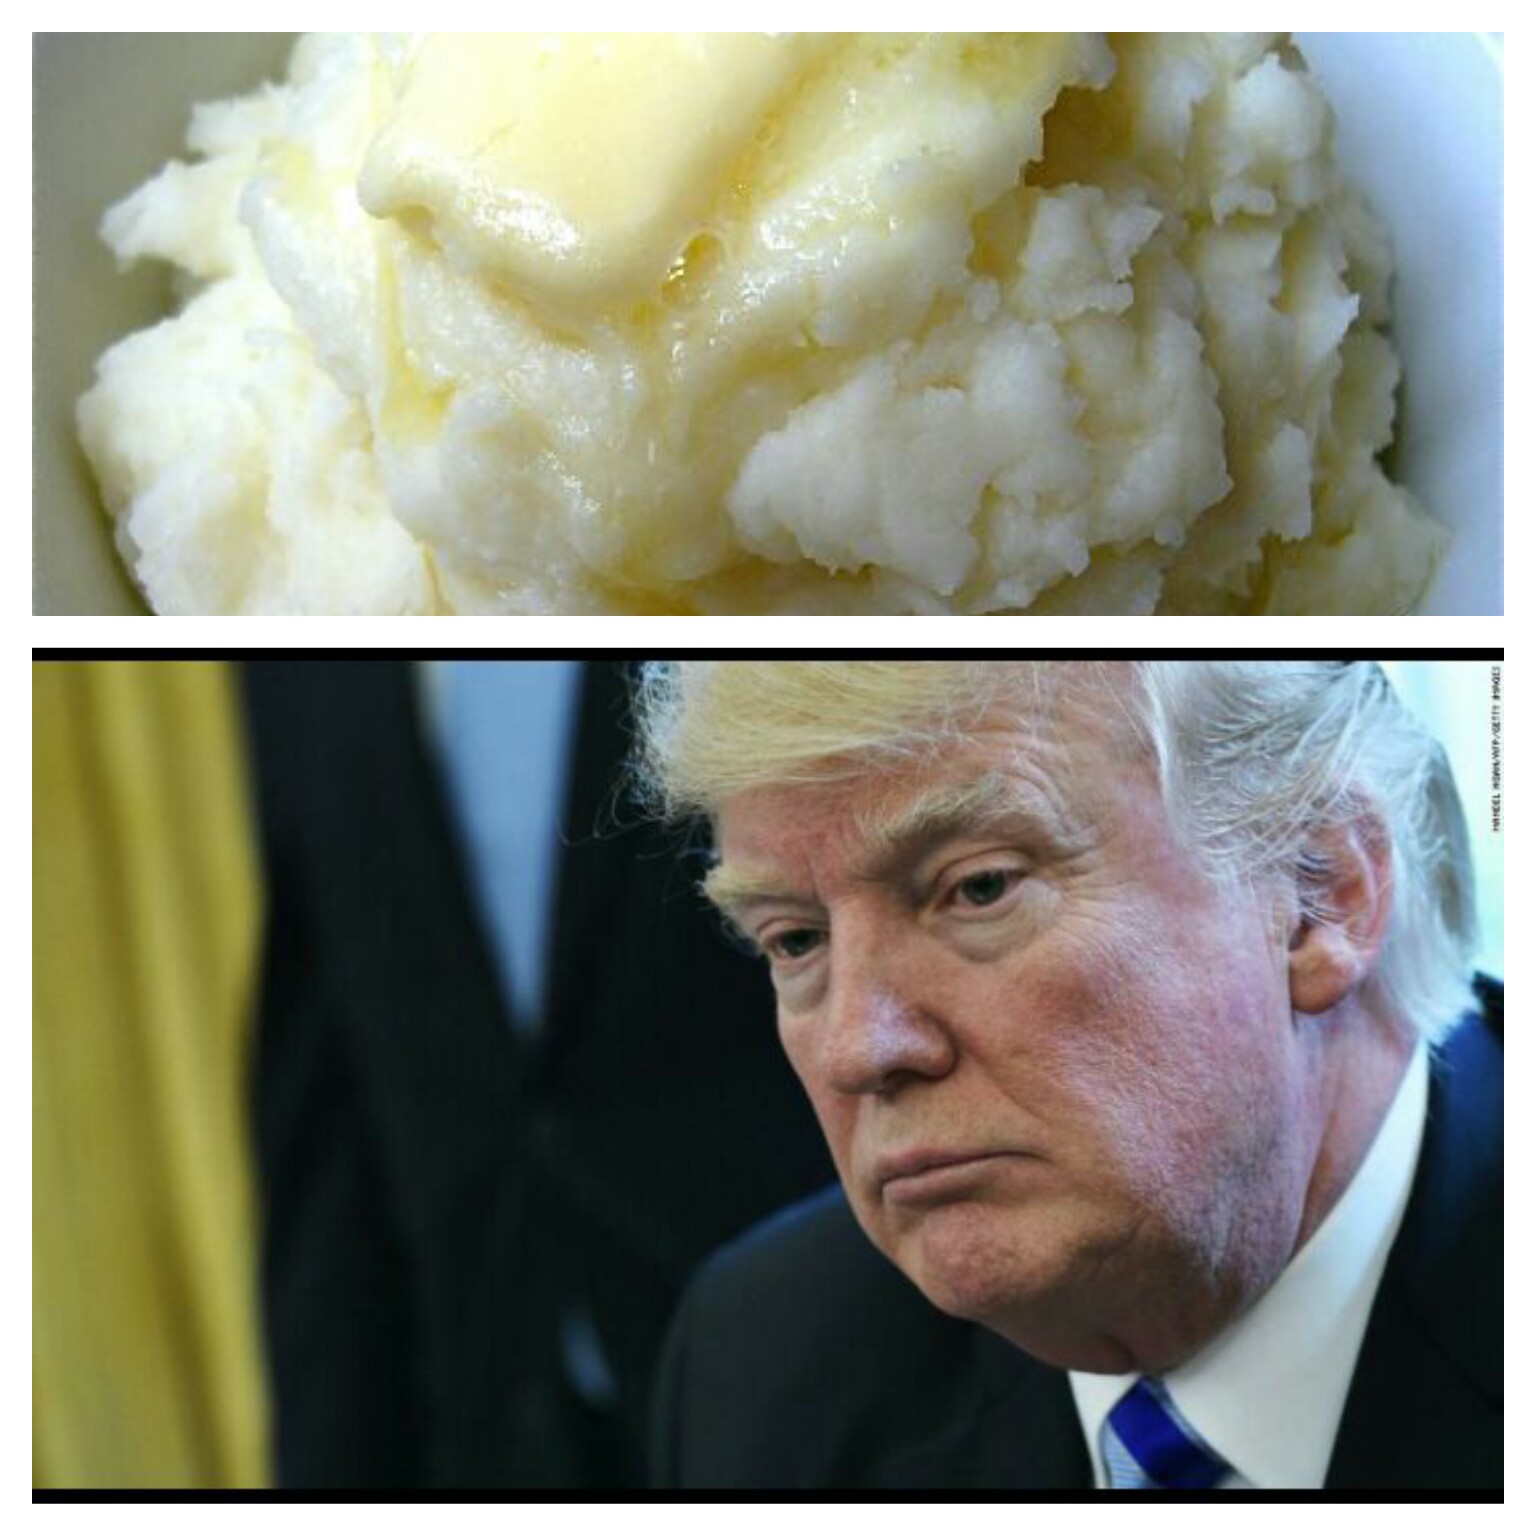 Anybody ever noticed Trump looks like a steaming pile of mashed potatoes and butter